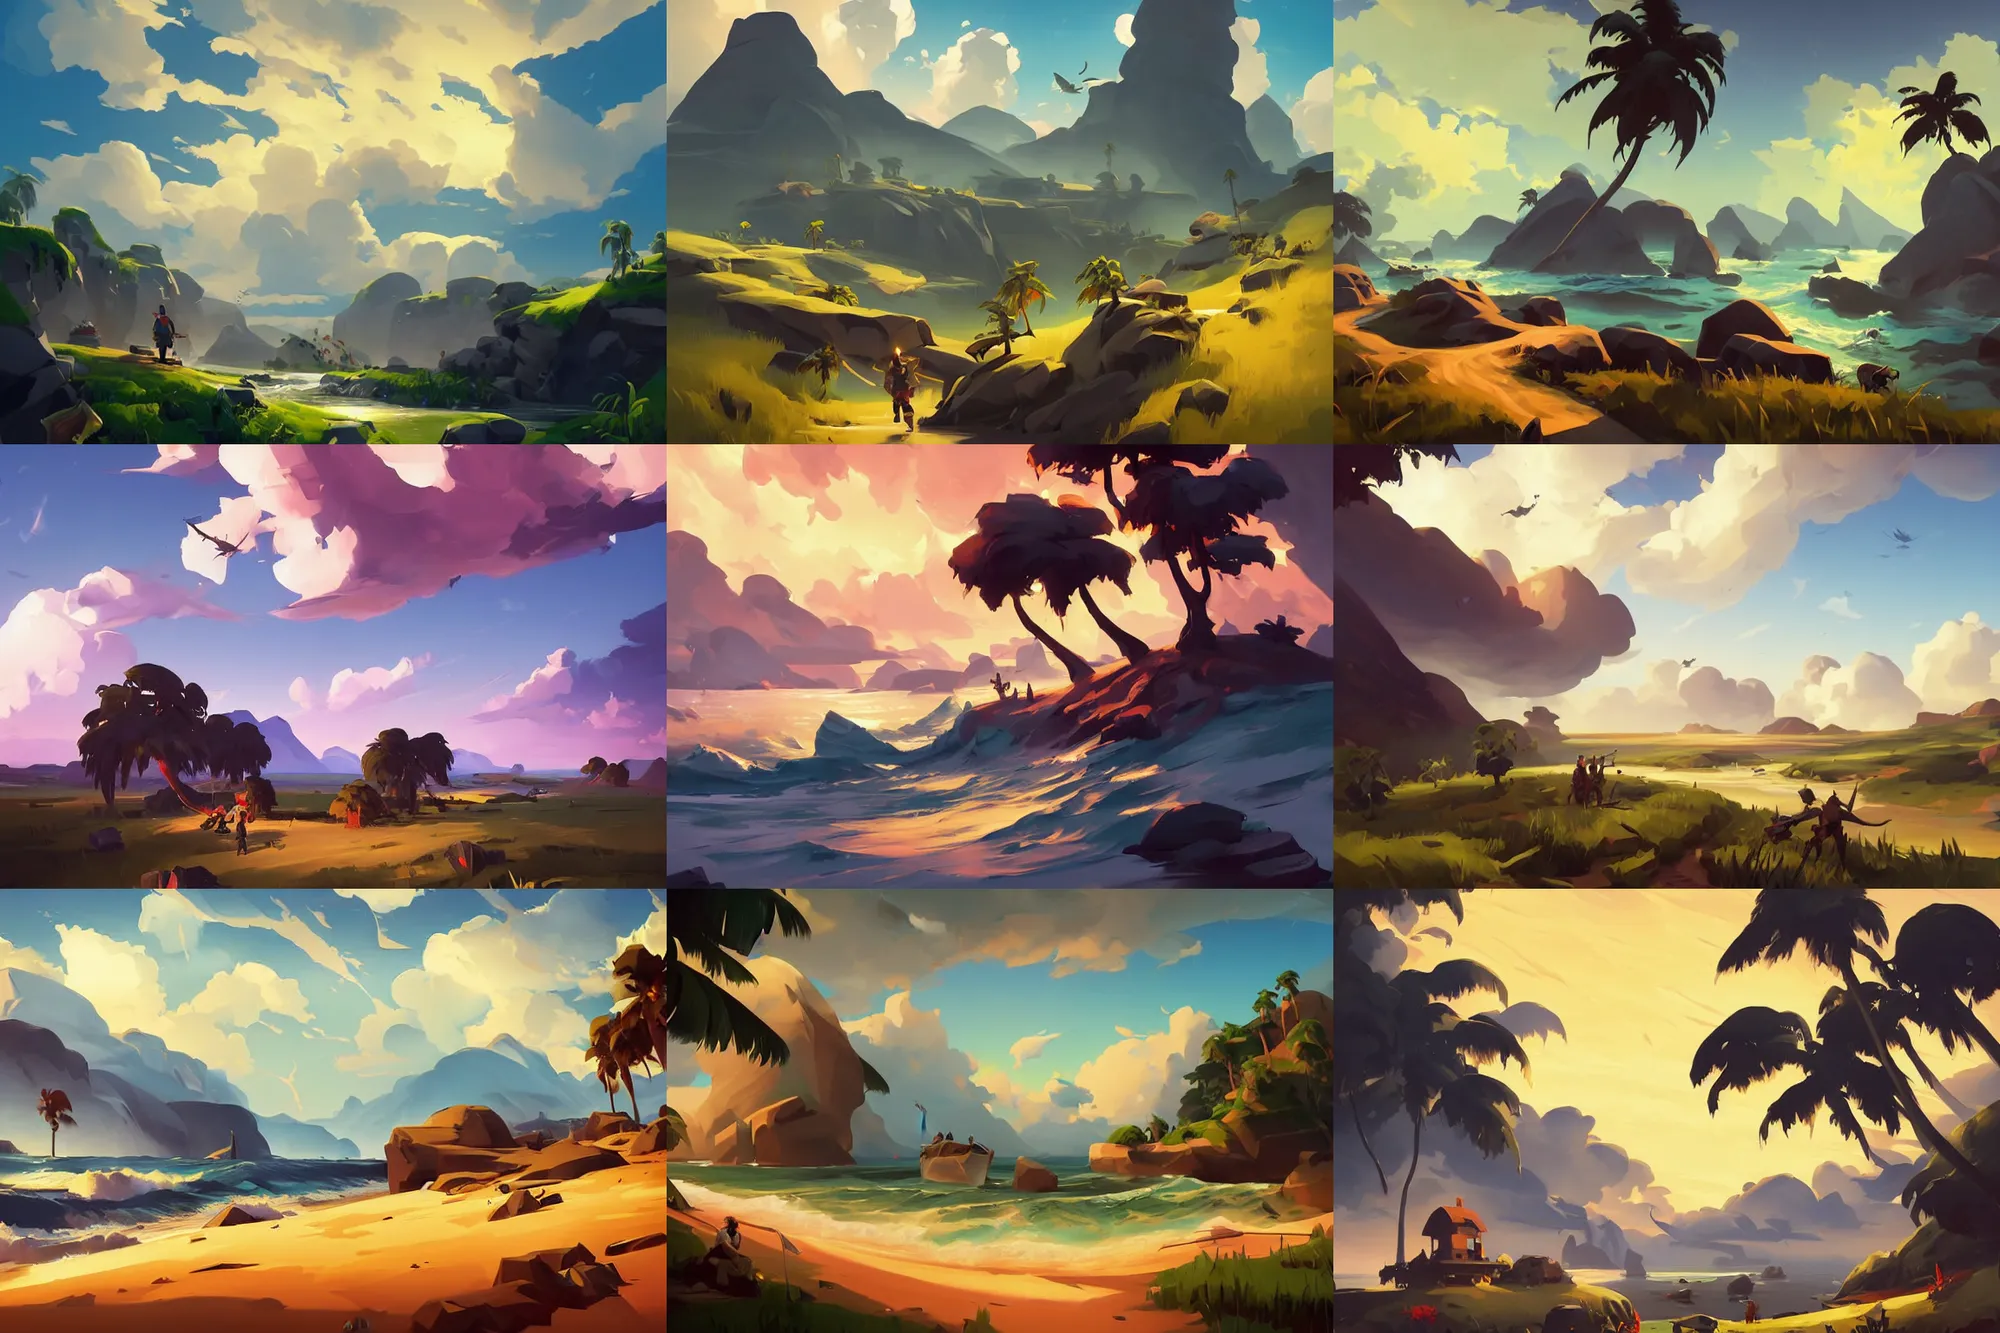 Prompt: landscape painting by sargent painting treasure on sea of thieves game smooth median photoshop filter cutout vector, behance hd by jesper ejsing, by rhads, makoto shinkai and lois van baarle, ilya kuvshinov, rossdraws global illumination adove low clouds sky image overcast